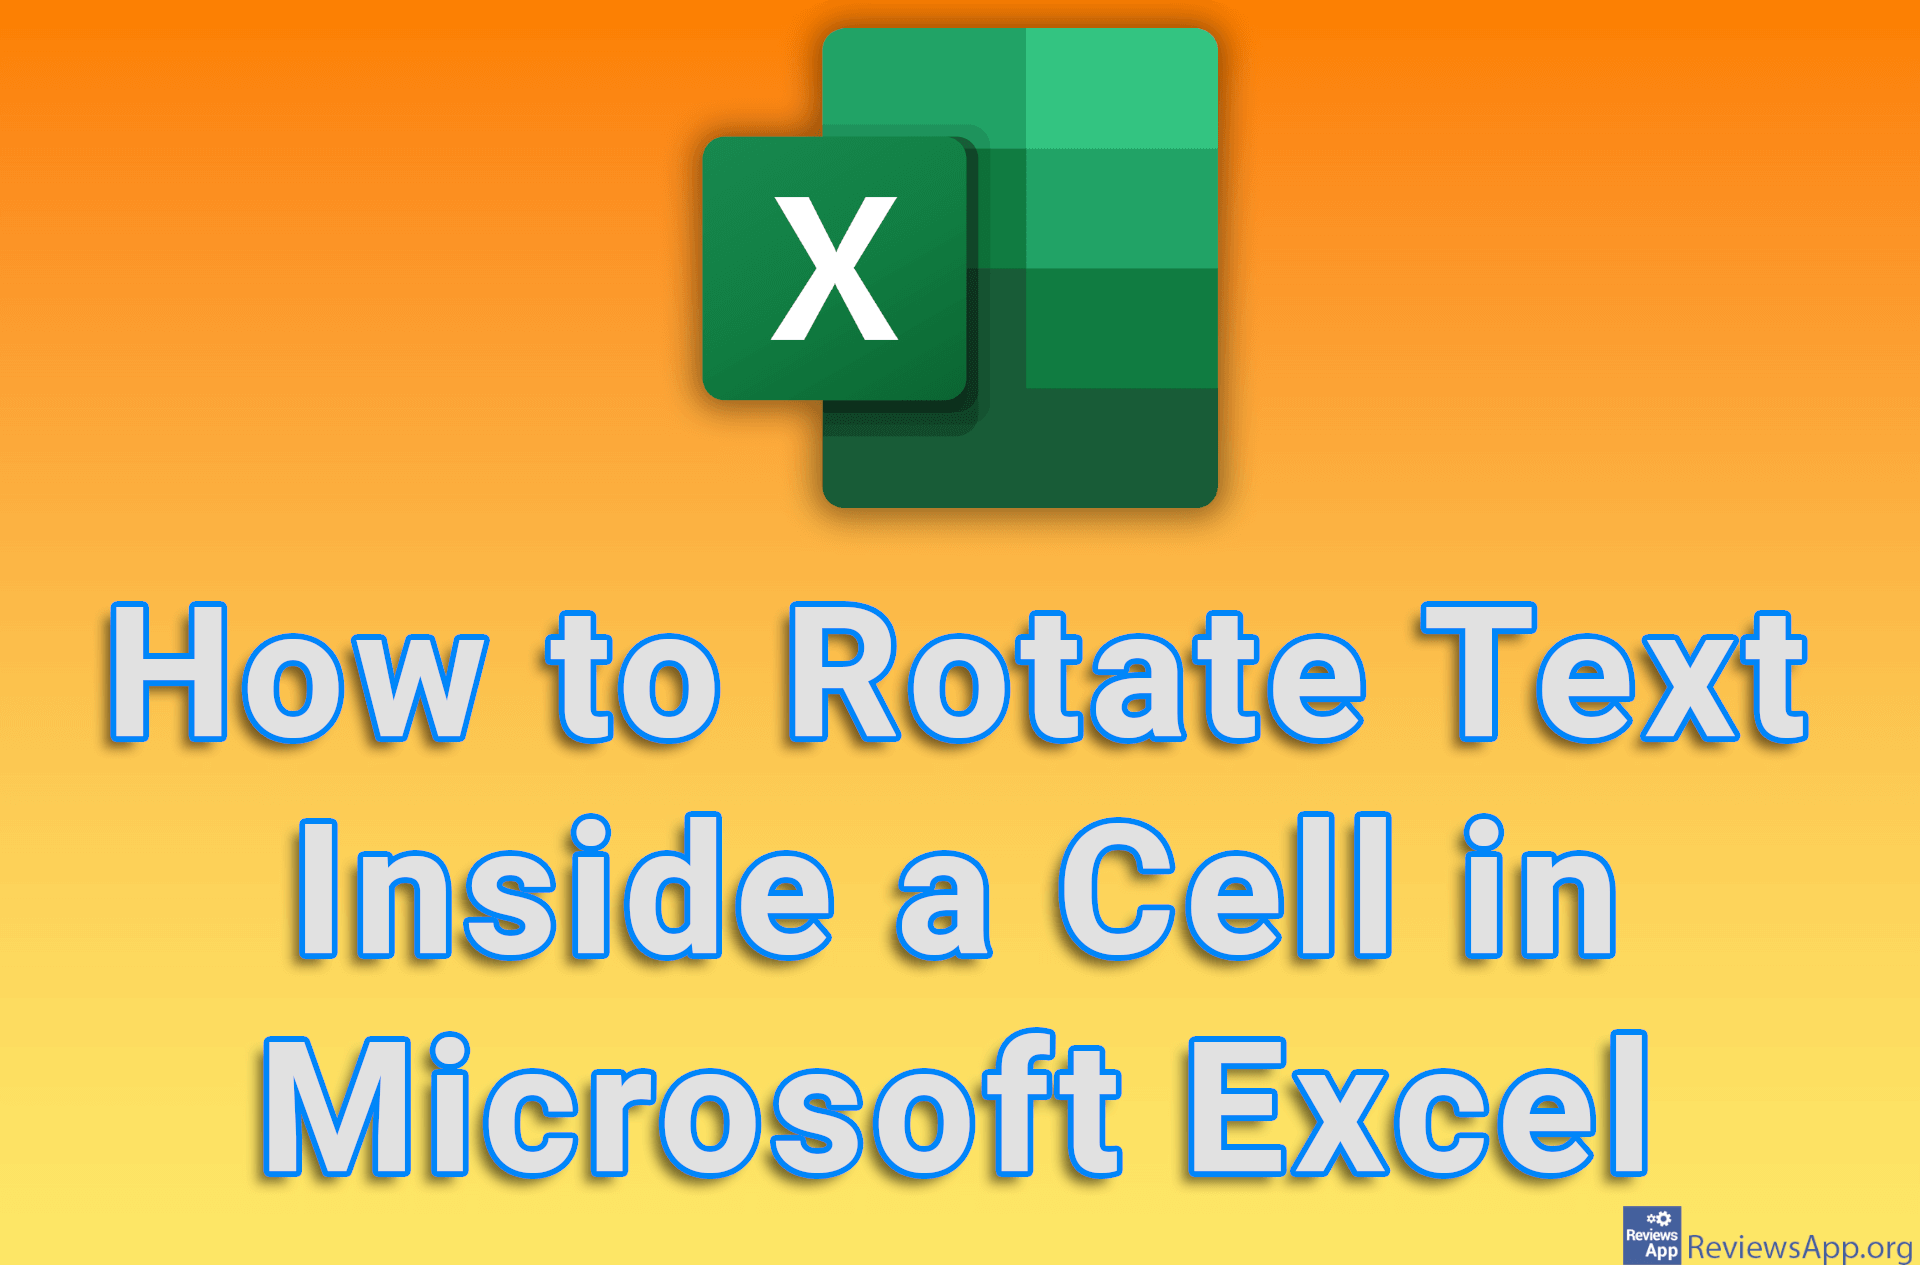 How to Rotate Text Inside a Cell in Microsoft Excel